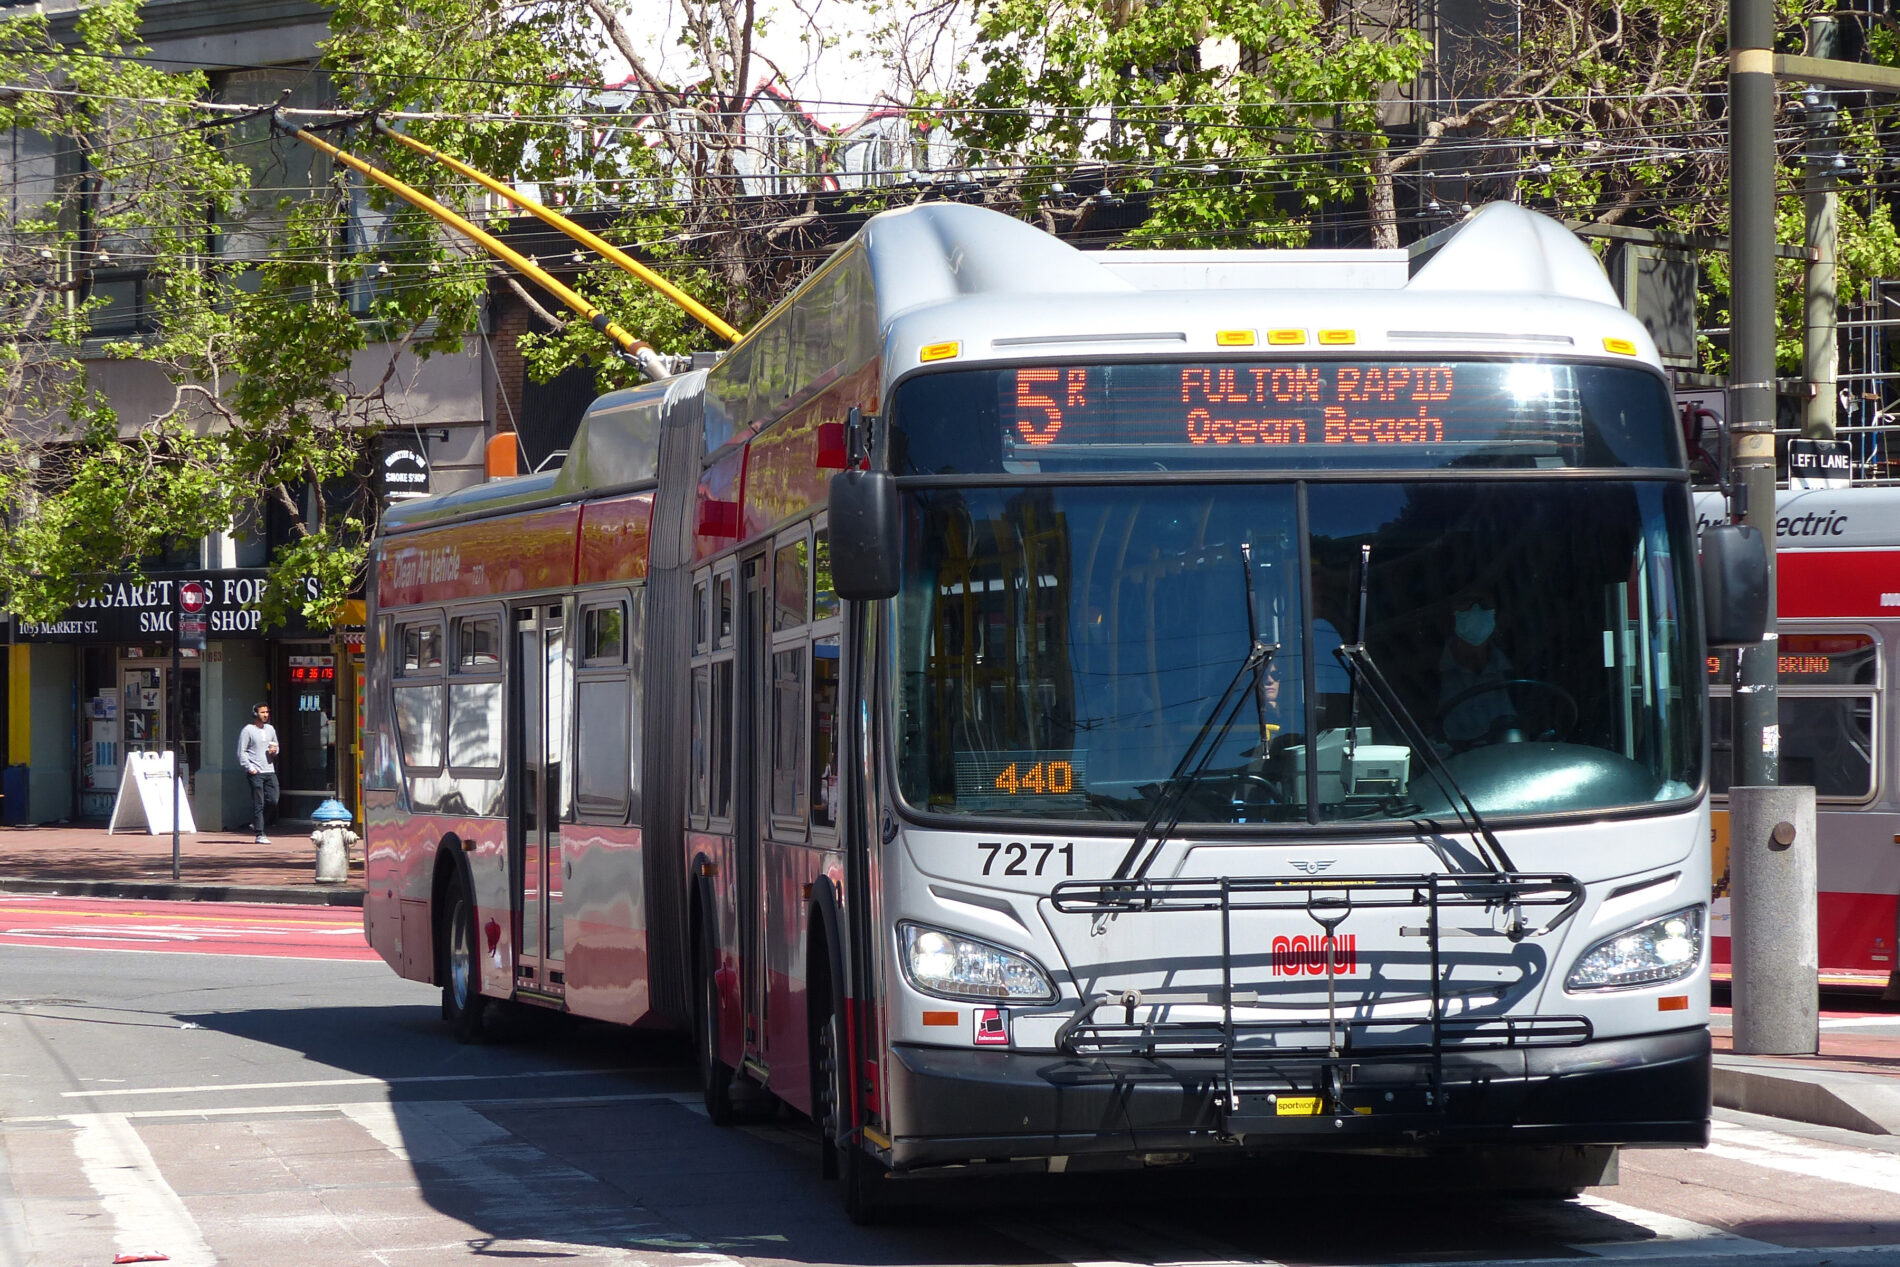 This 5R Fulton Muni bus, headed to Ocean Beach, stops at the 8th Avenue entrance to Golden Gate Park.